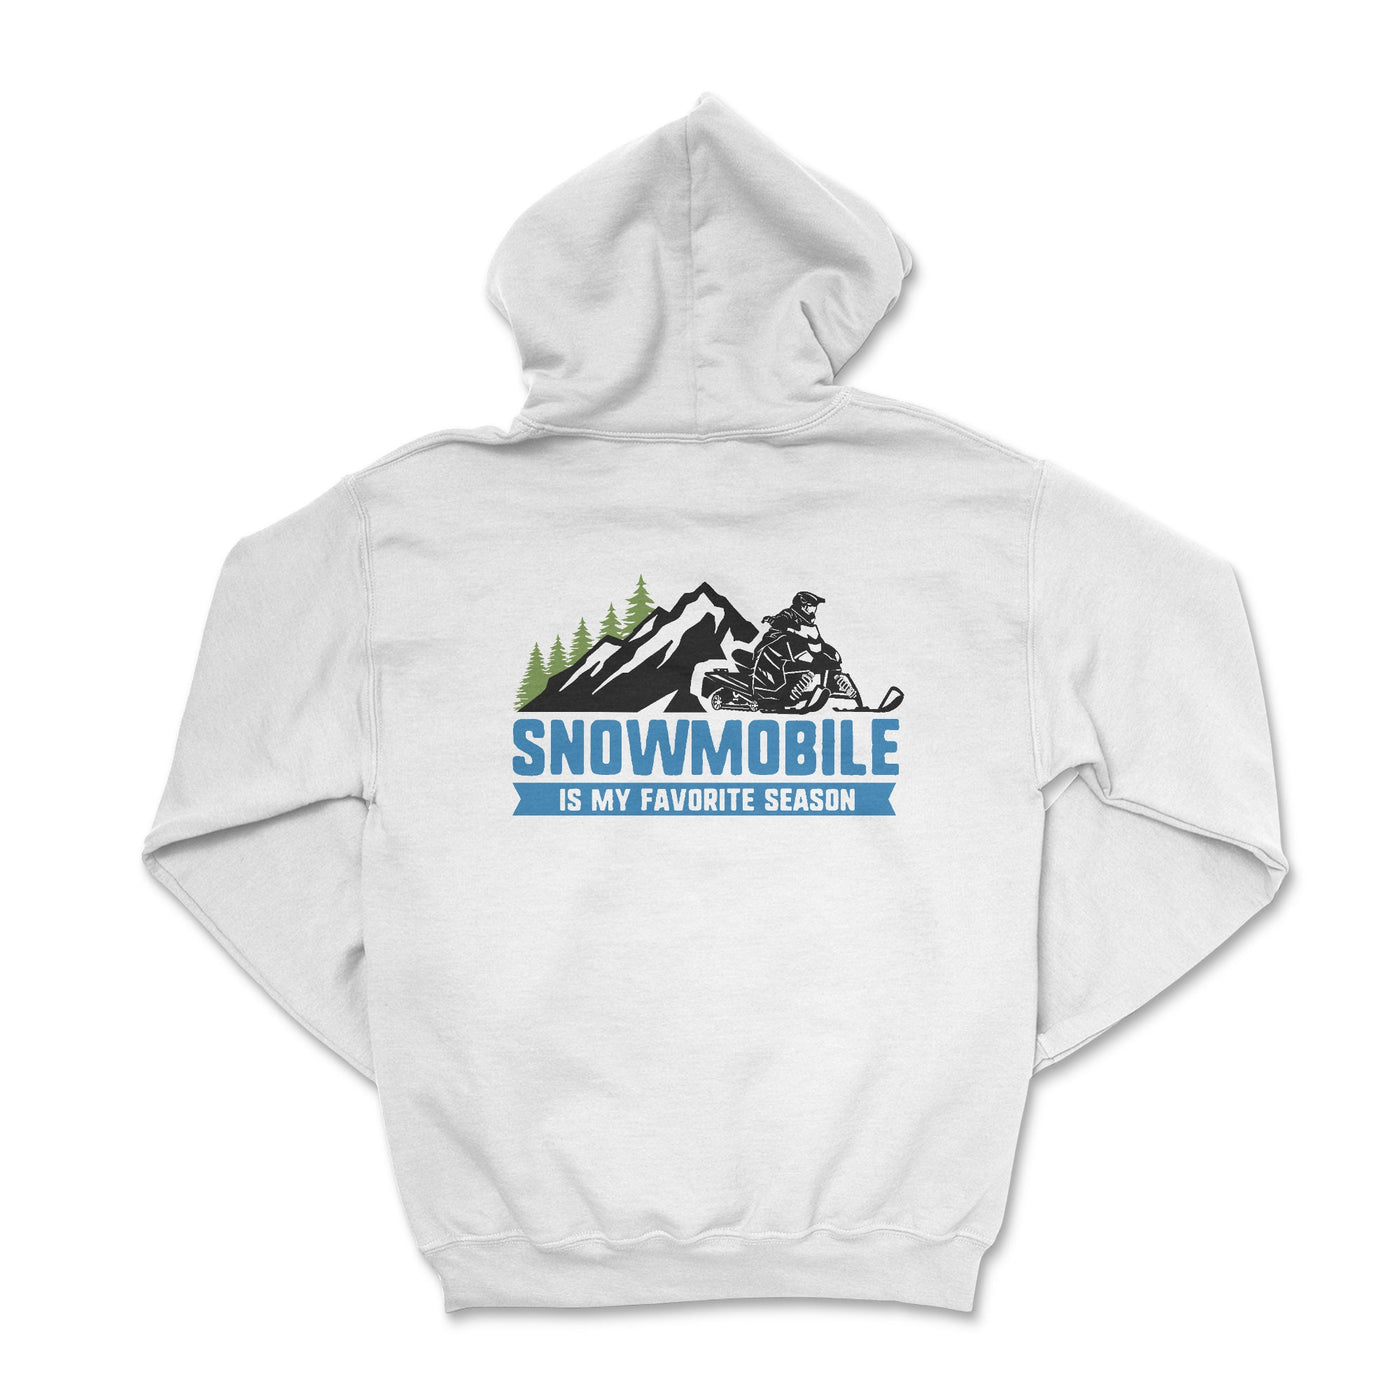 Snowmobile is My Favorite Season Hoodie - Goats Trail Off-Road Apparel Company